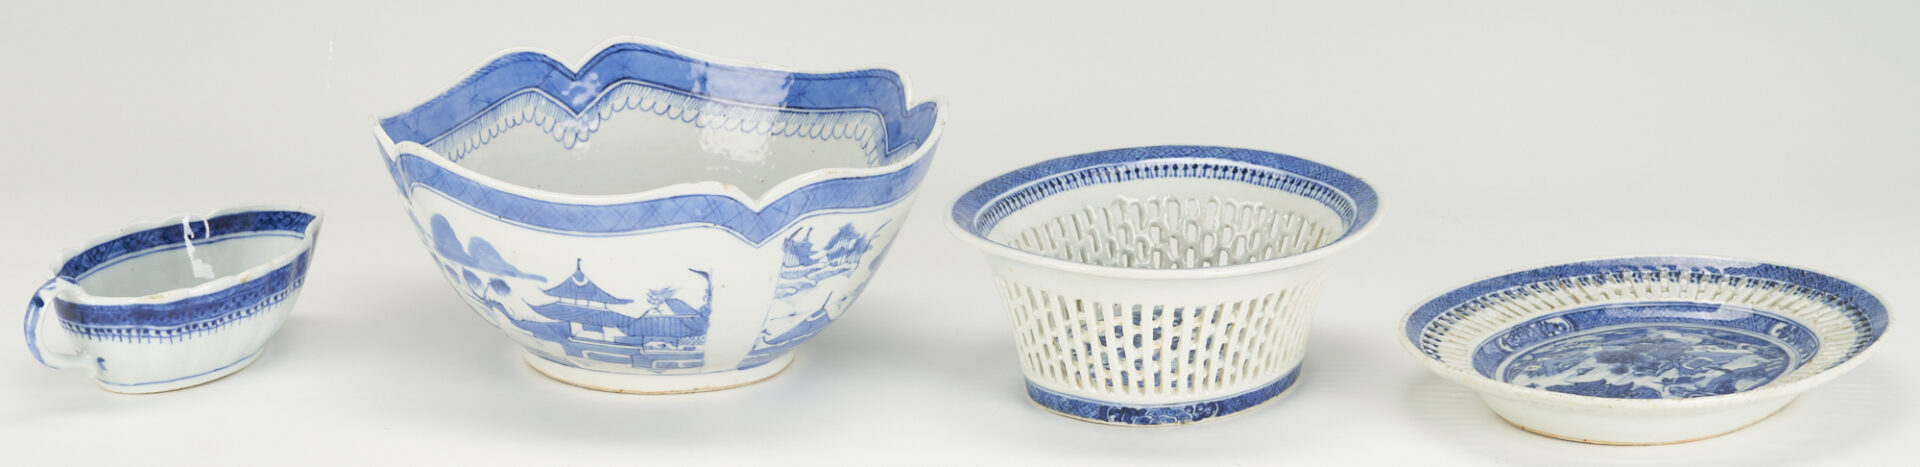 Lot 869: 12 Assorted Chinese Export Canton Porcelain Items, incl. Chestnut Basket & Teapots